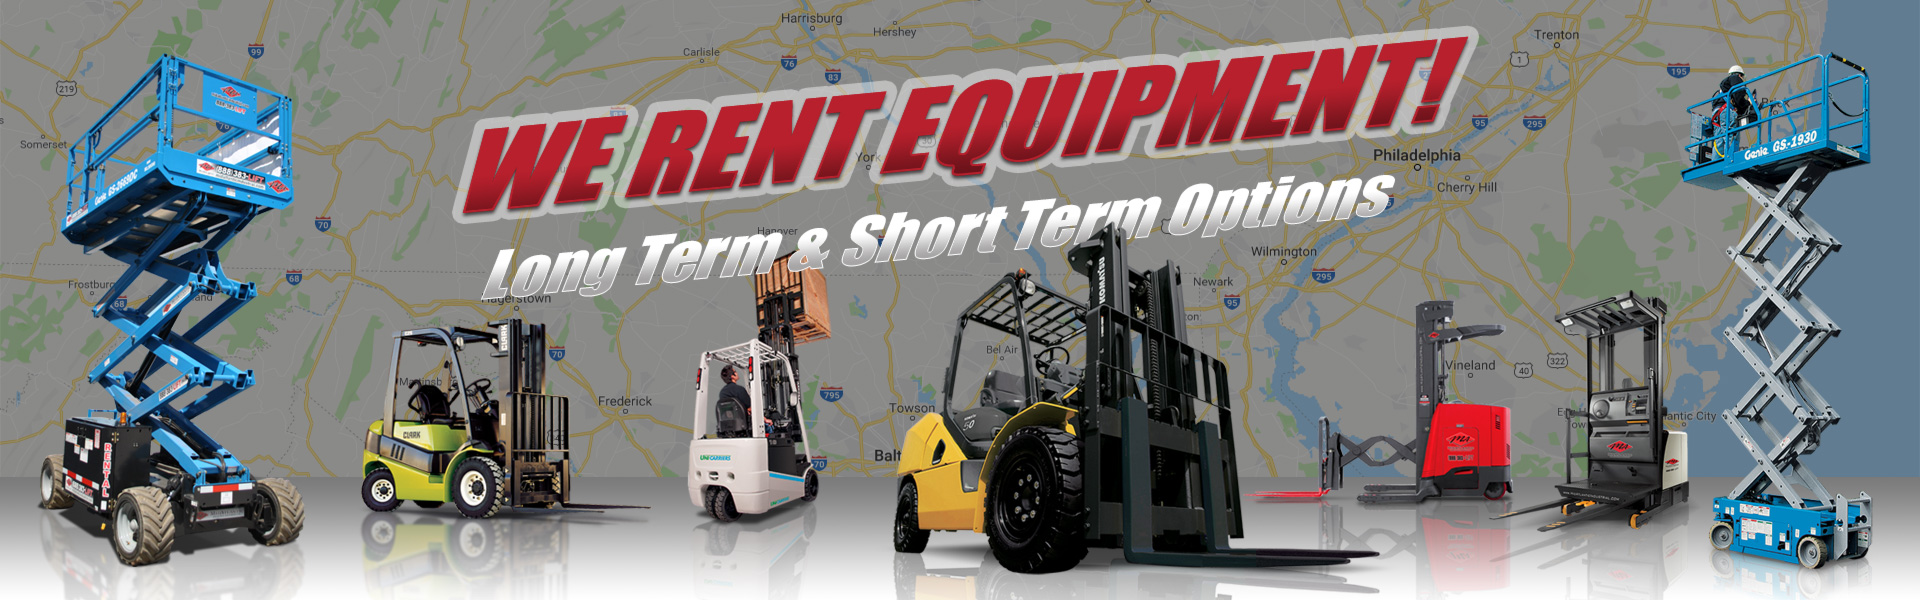 We Rent Equipment - Forklifts and Other Material Handling Equipment - Long Term and Short Term Equipment Rental Options Available